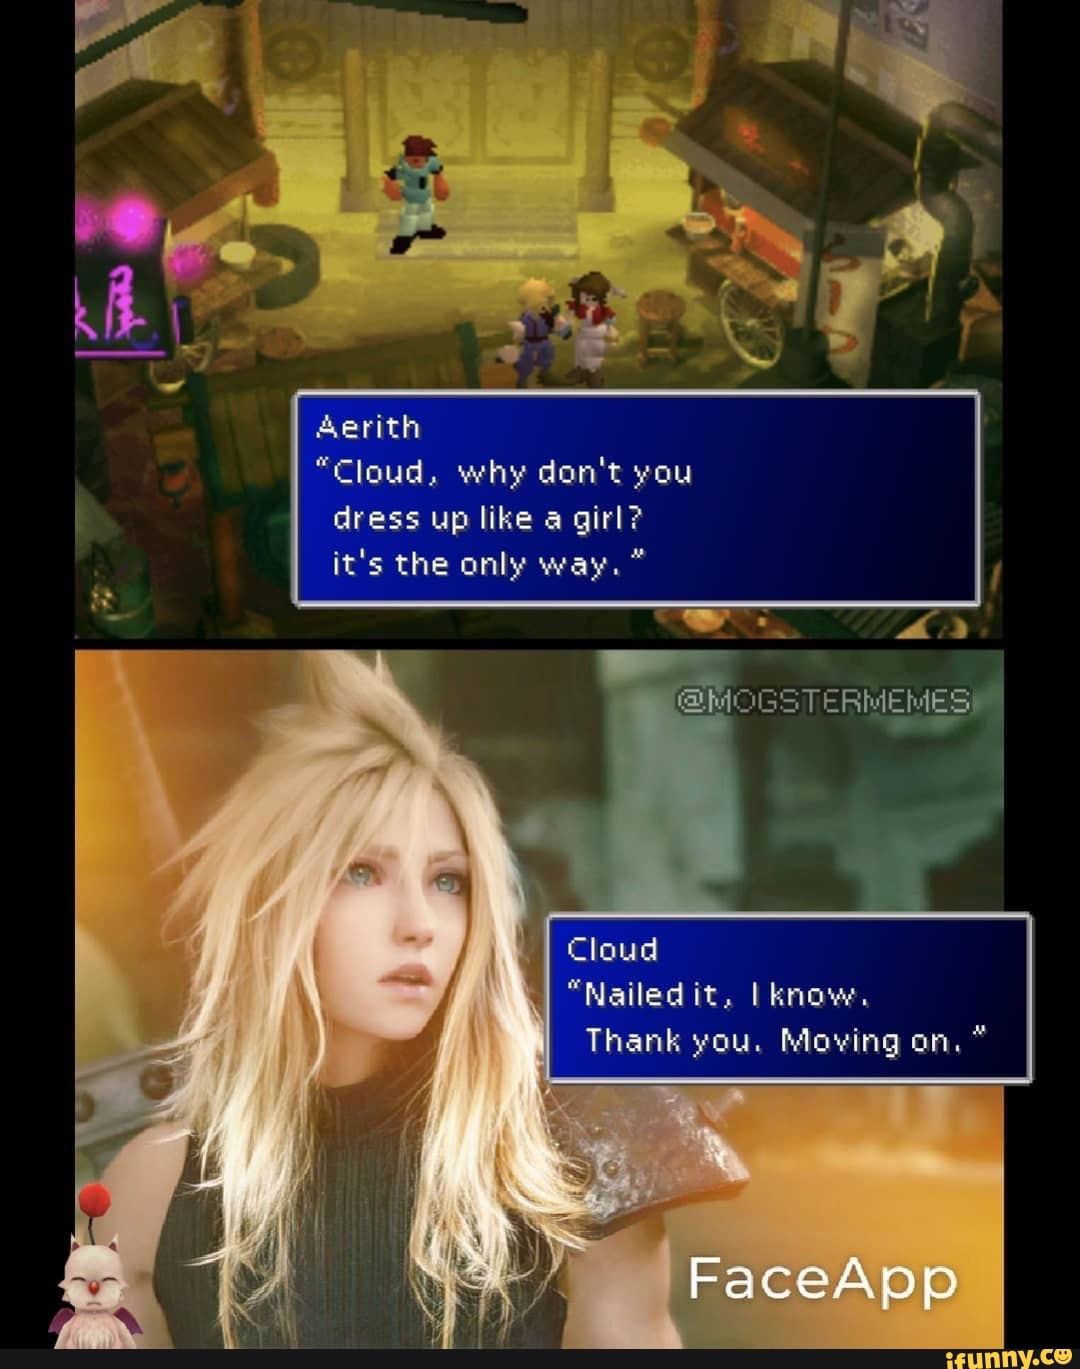 Aerith Cloud Why Don T You Dress Up Like Girl It S The Only Way Cloud Nailed It Know